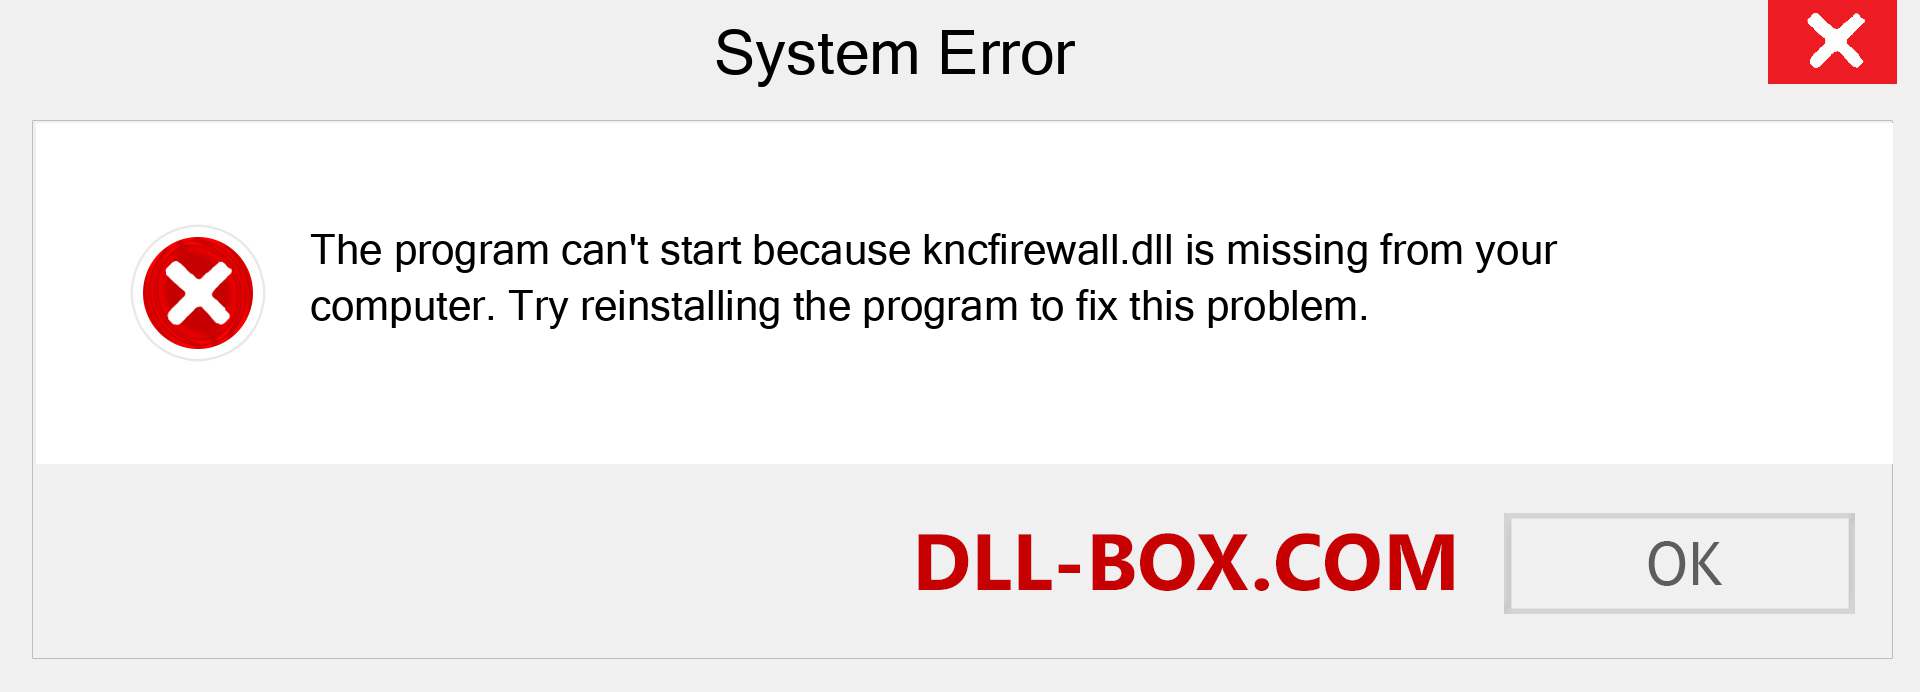  kncfirewall.dll file is missing?. Download for Windows 7, 8, 10 - Fix  kncfirewall dll Missing Error on Windows, photos, images